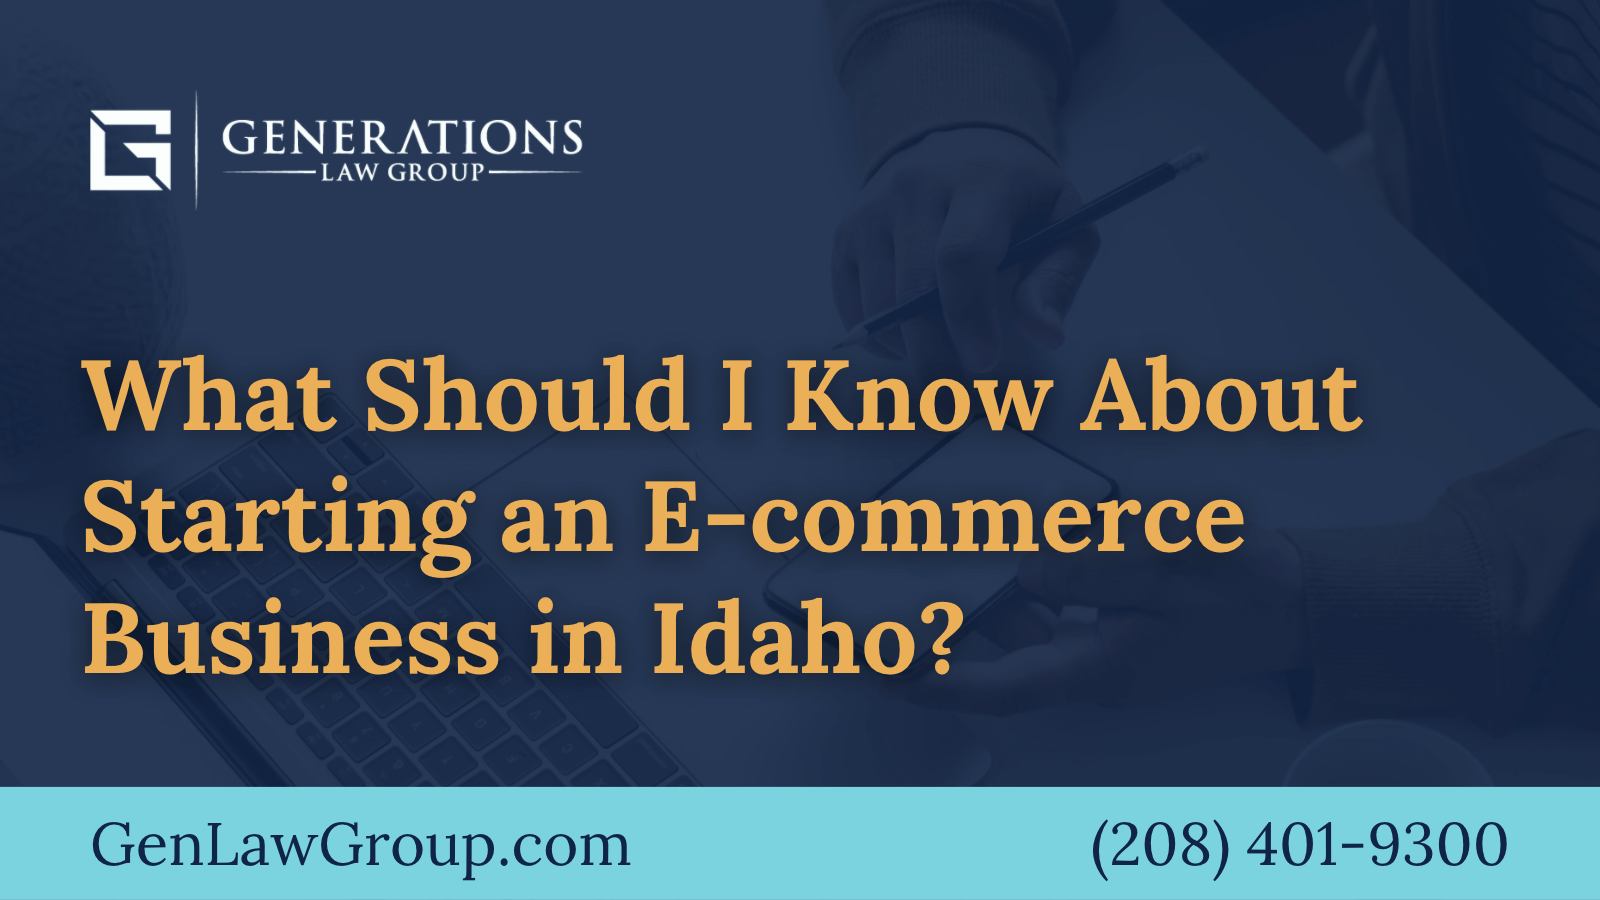 What Should I Know About Starting an Ecommerce Business in Idaho?